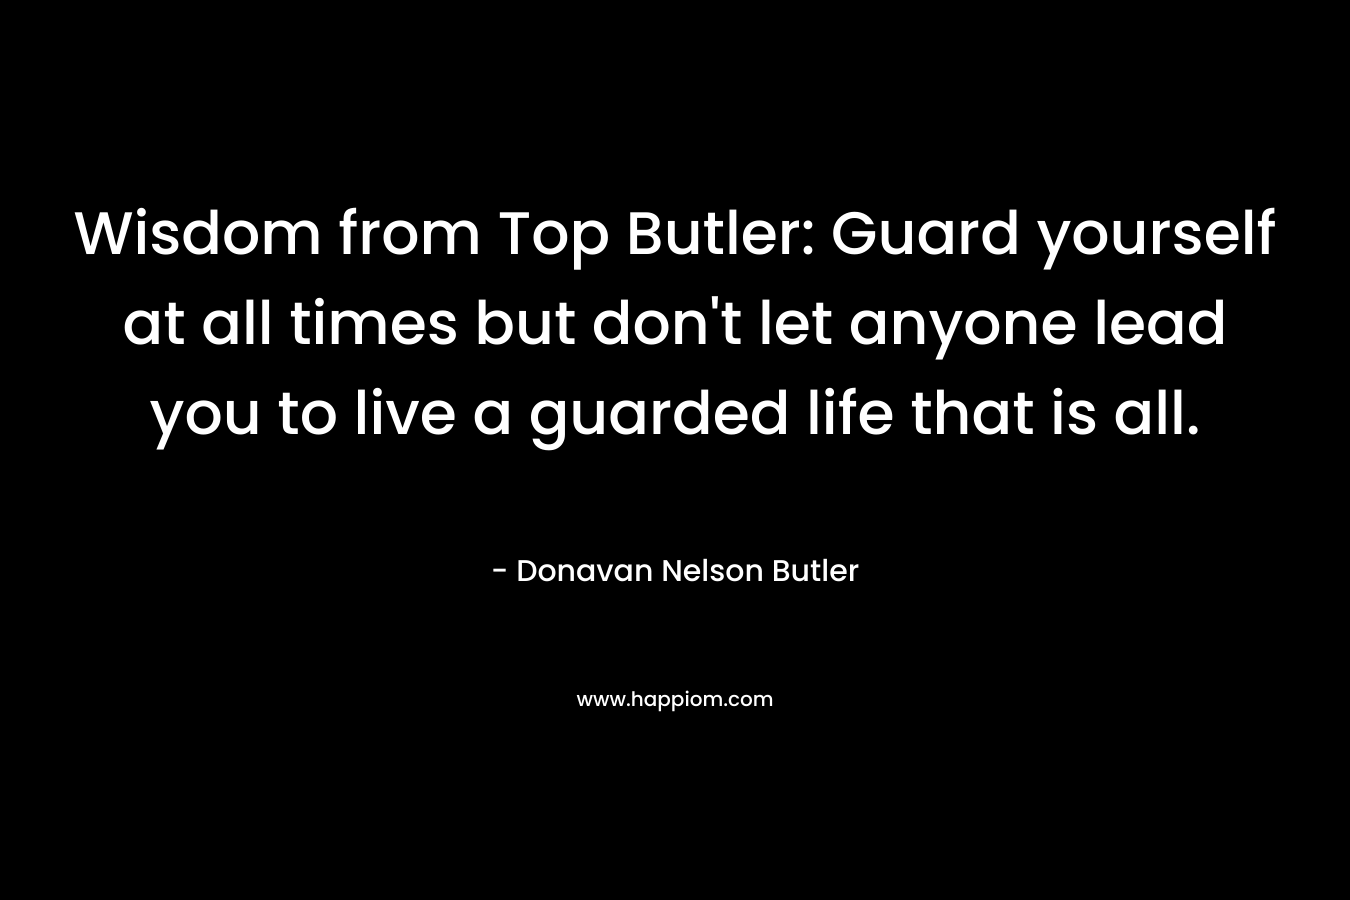 Wisdom from Top Butler: Guard yourself at all times but don’t let anyone lead you to live a guarded life that is all. – Donavan Nelson Butler